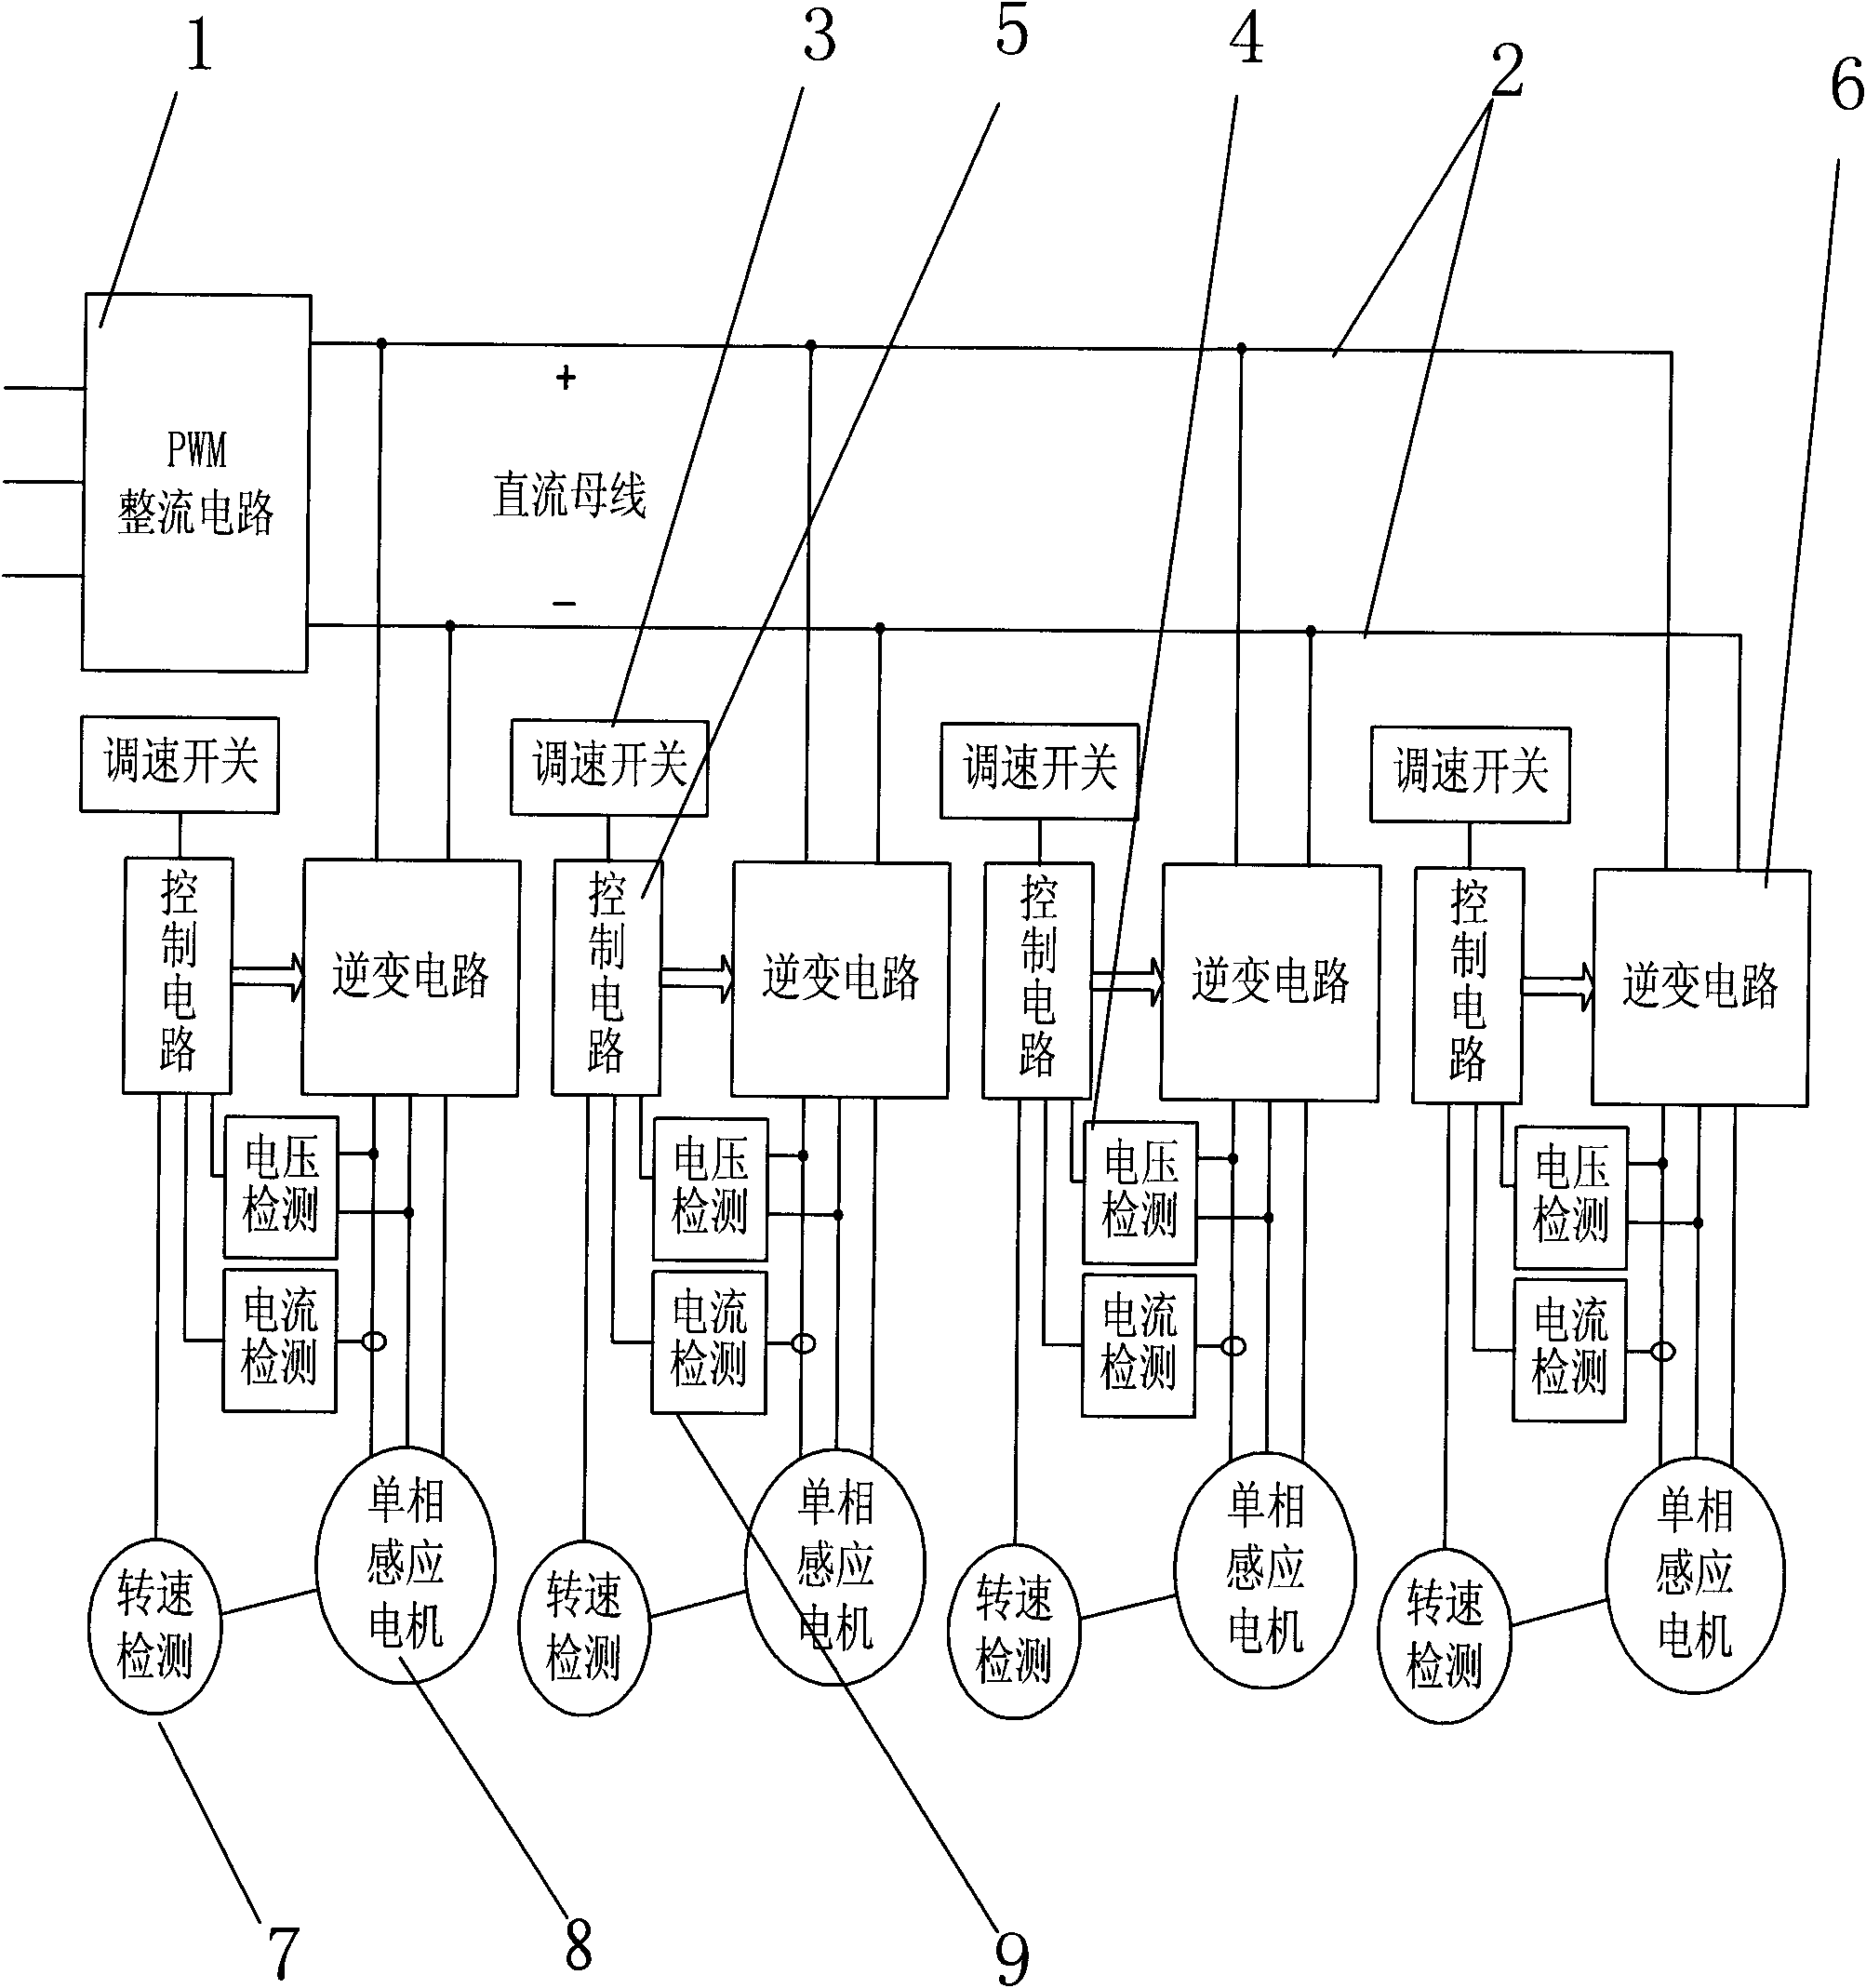 Speed regulation control system of single-phase induction motor